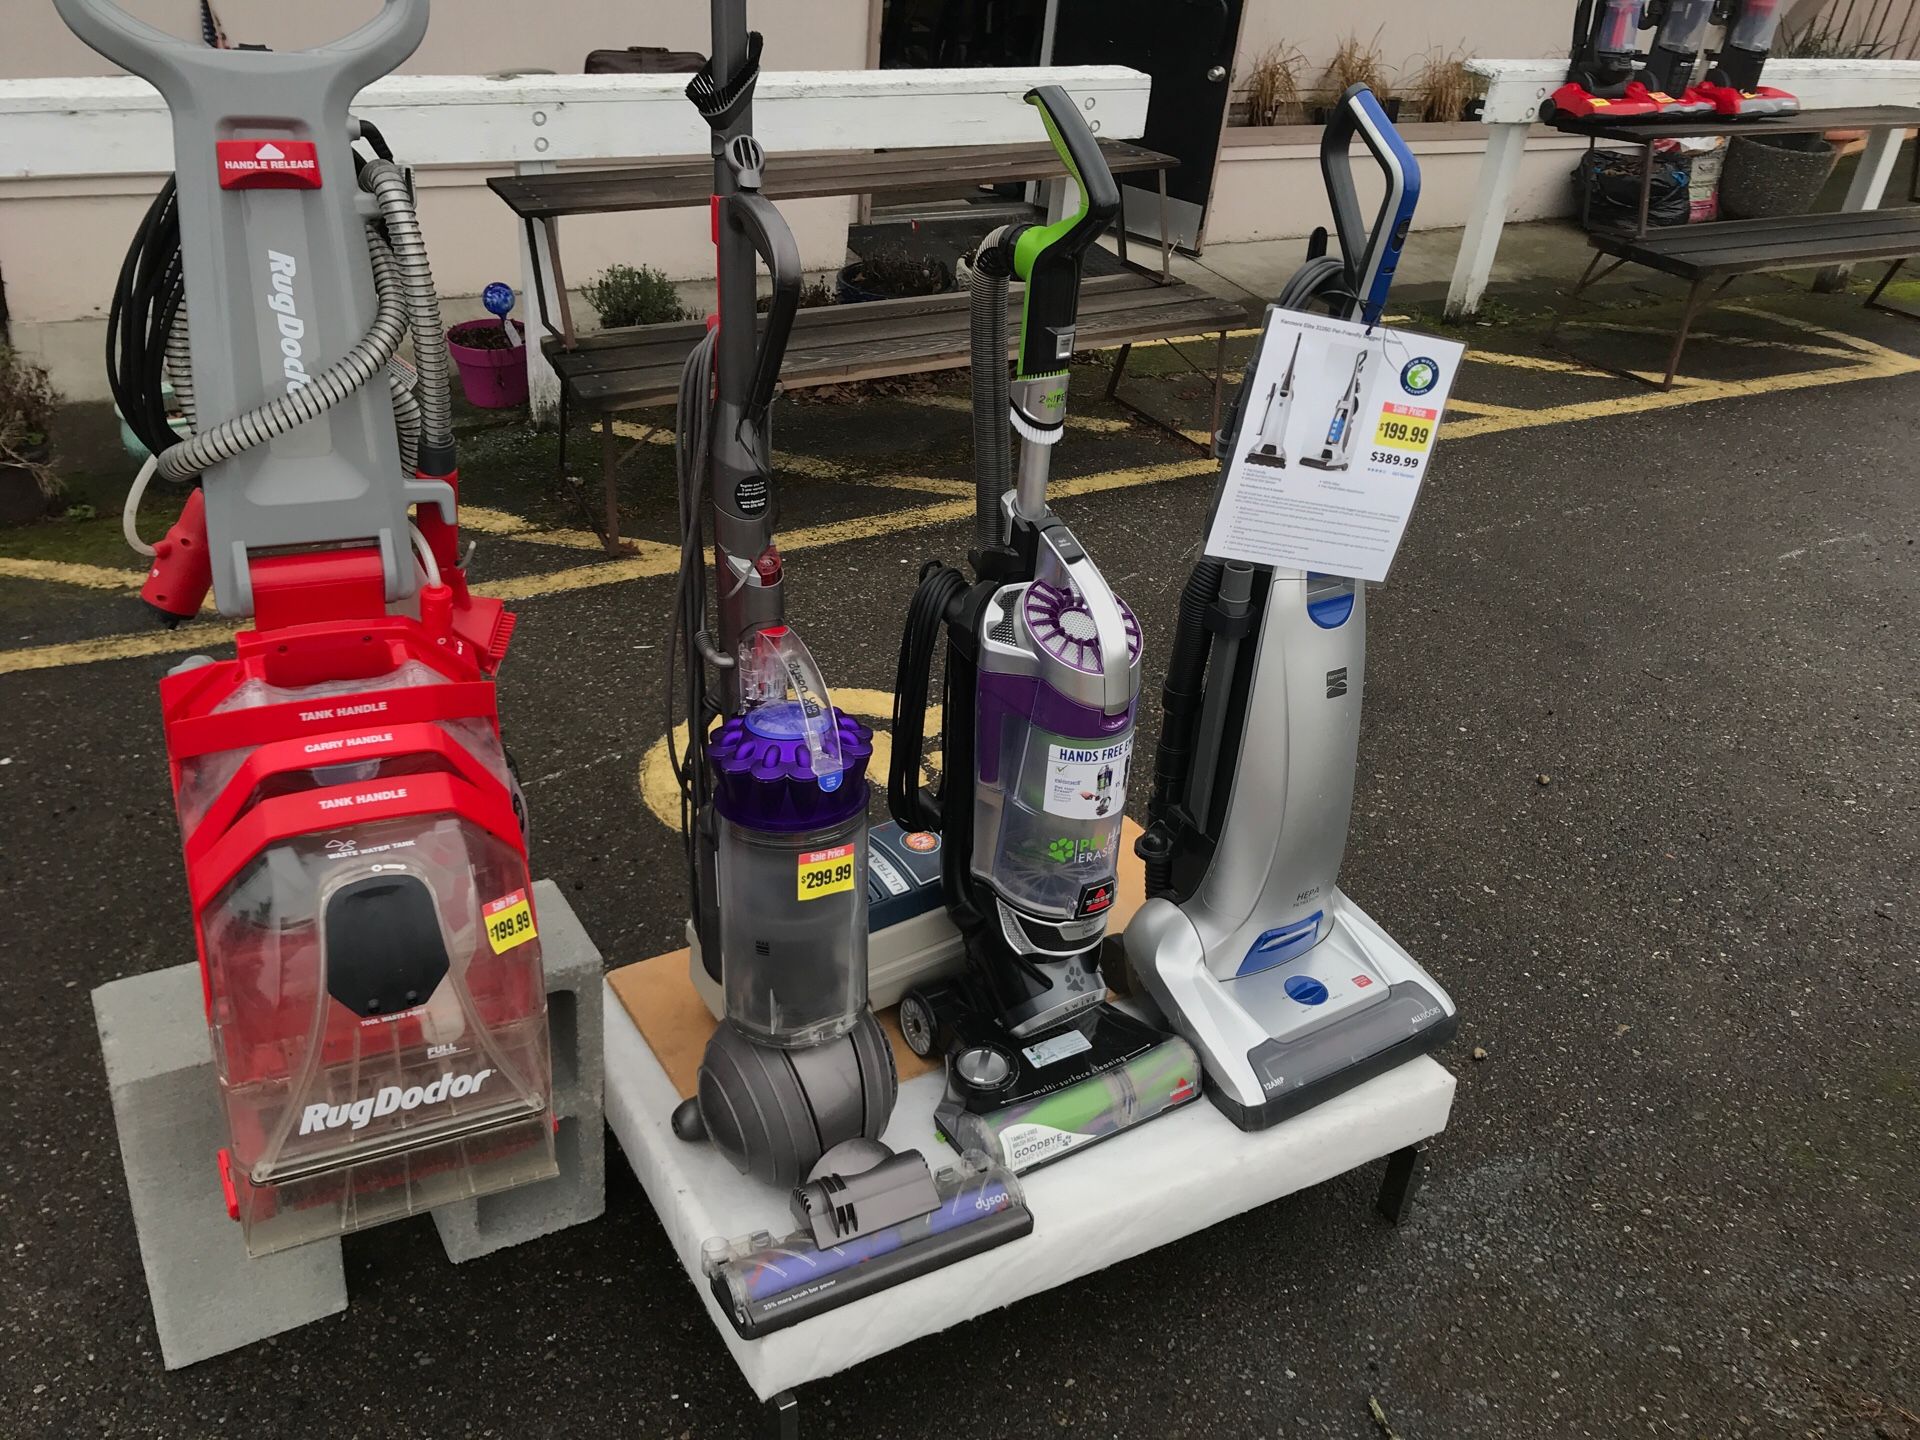 Vacuum cleaner s certified refurbished. Buy one of these vacuum s get rug doctor shampooer FREE. DYSON DC65 or bissel pet hair eraser or kenmore p